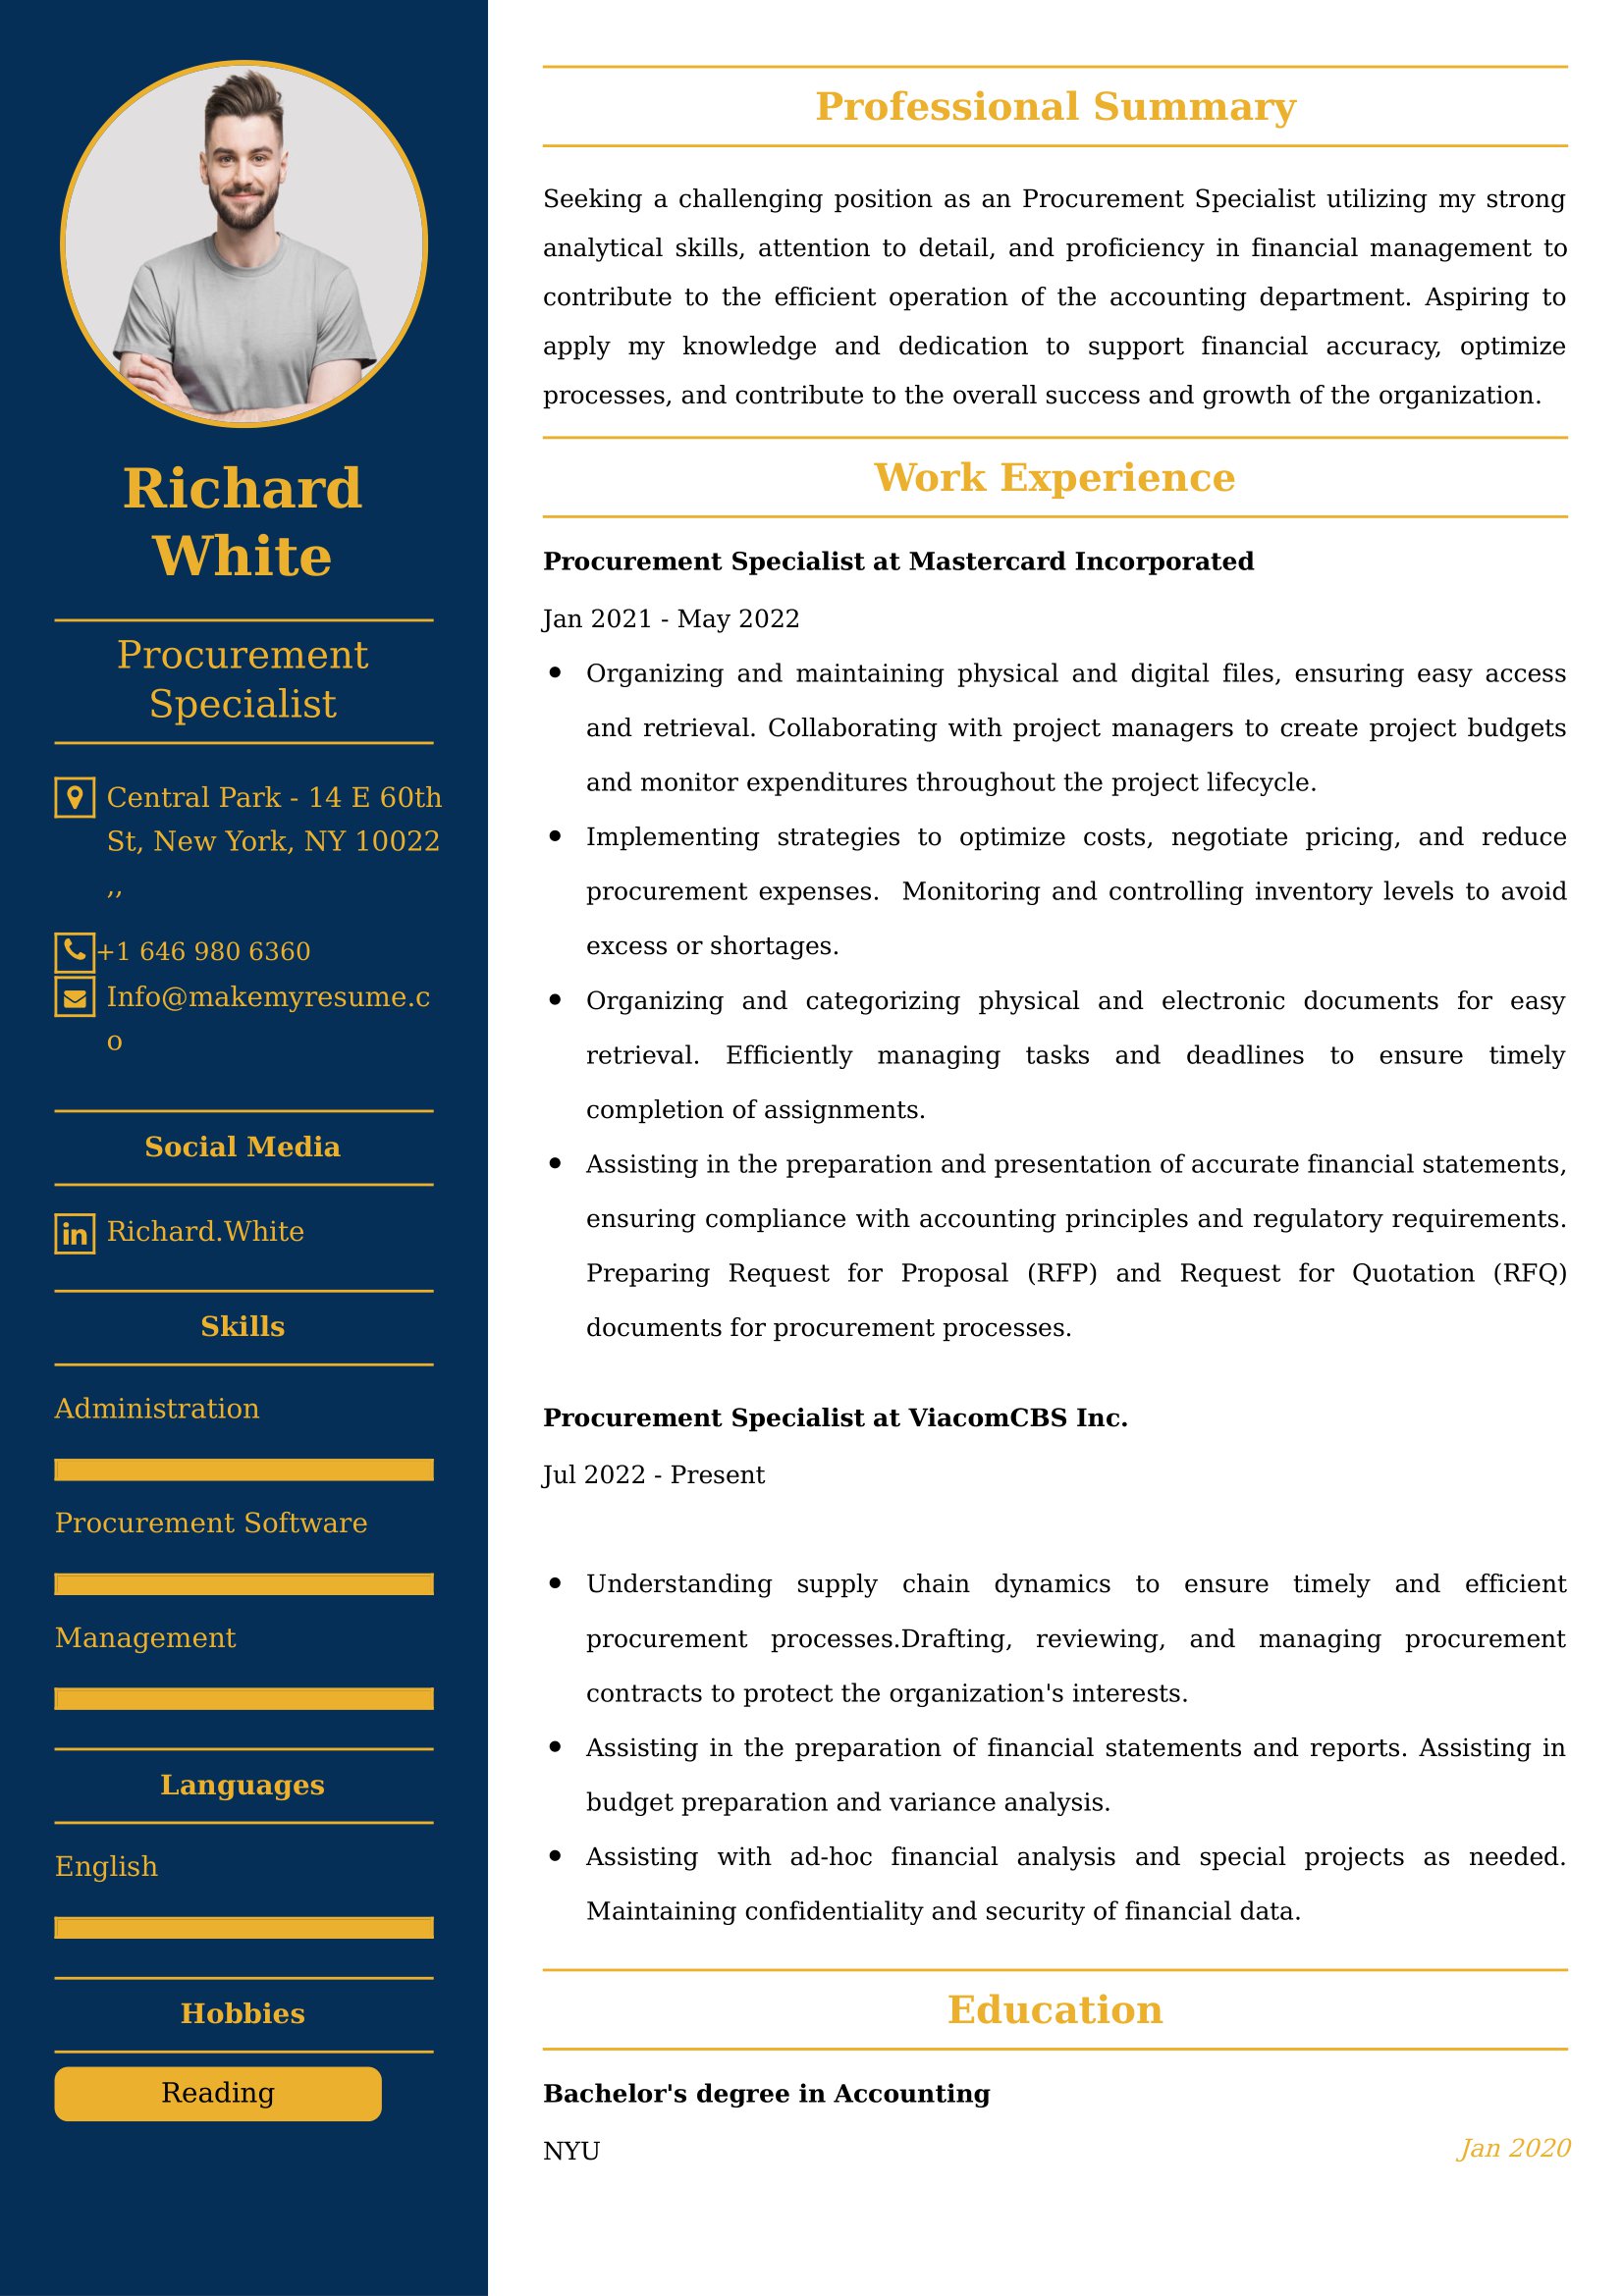 Procurement Specialist Resume Examples for UK Jobs - Tips and Guide